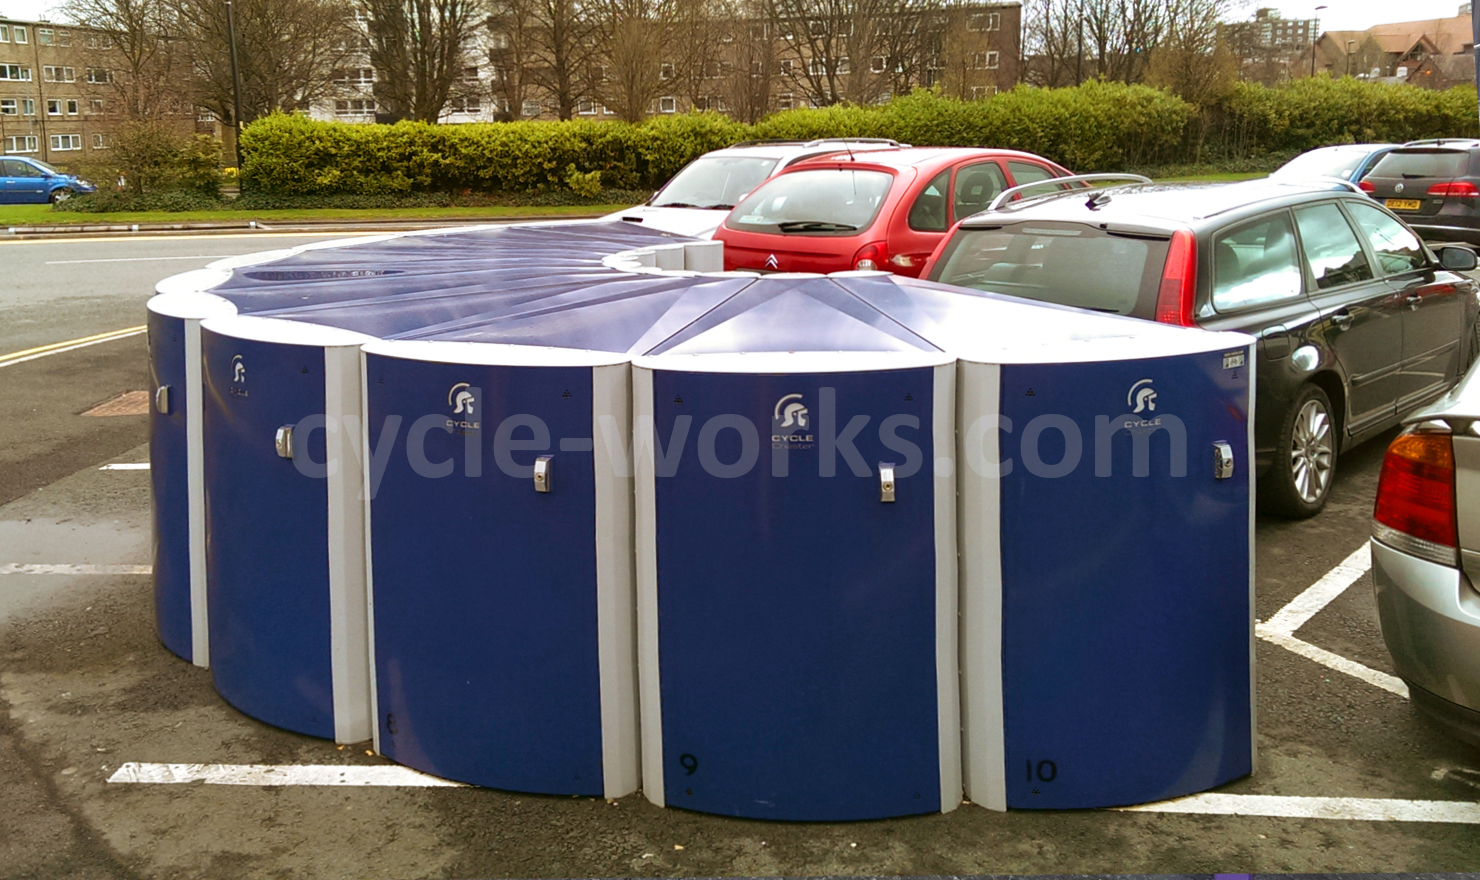 Chester Park and Ride Bike Lockers